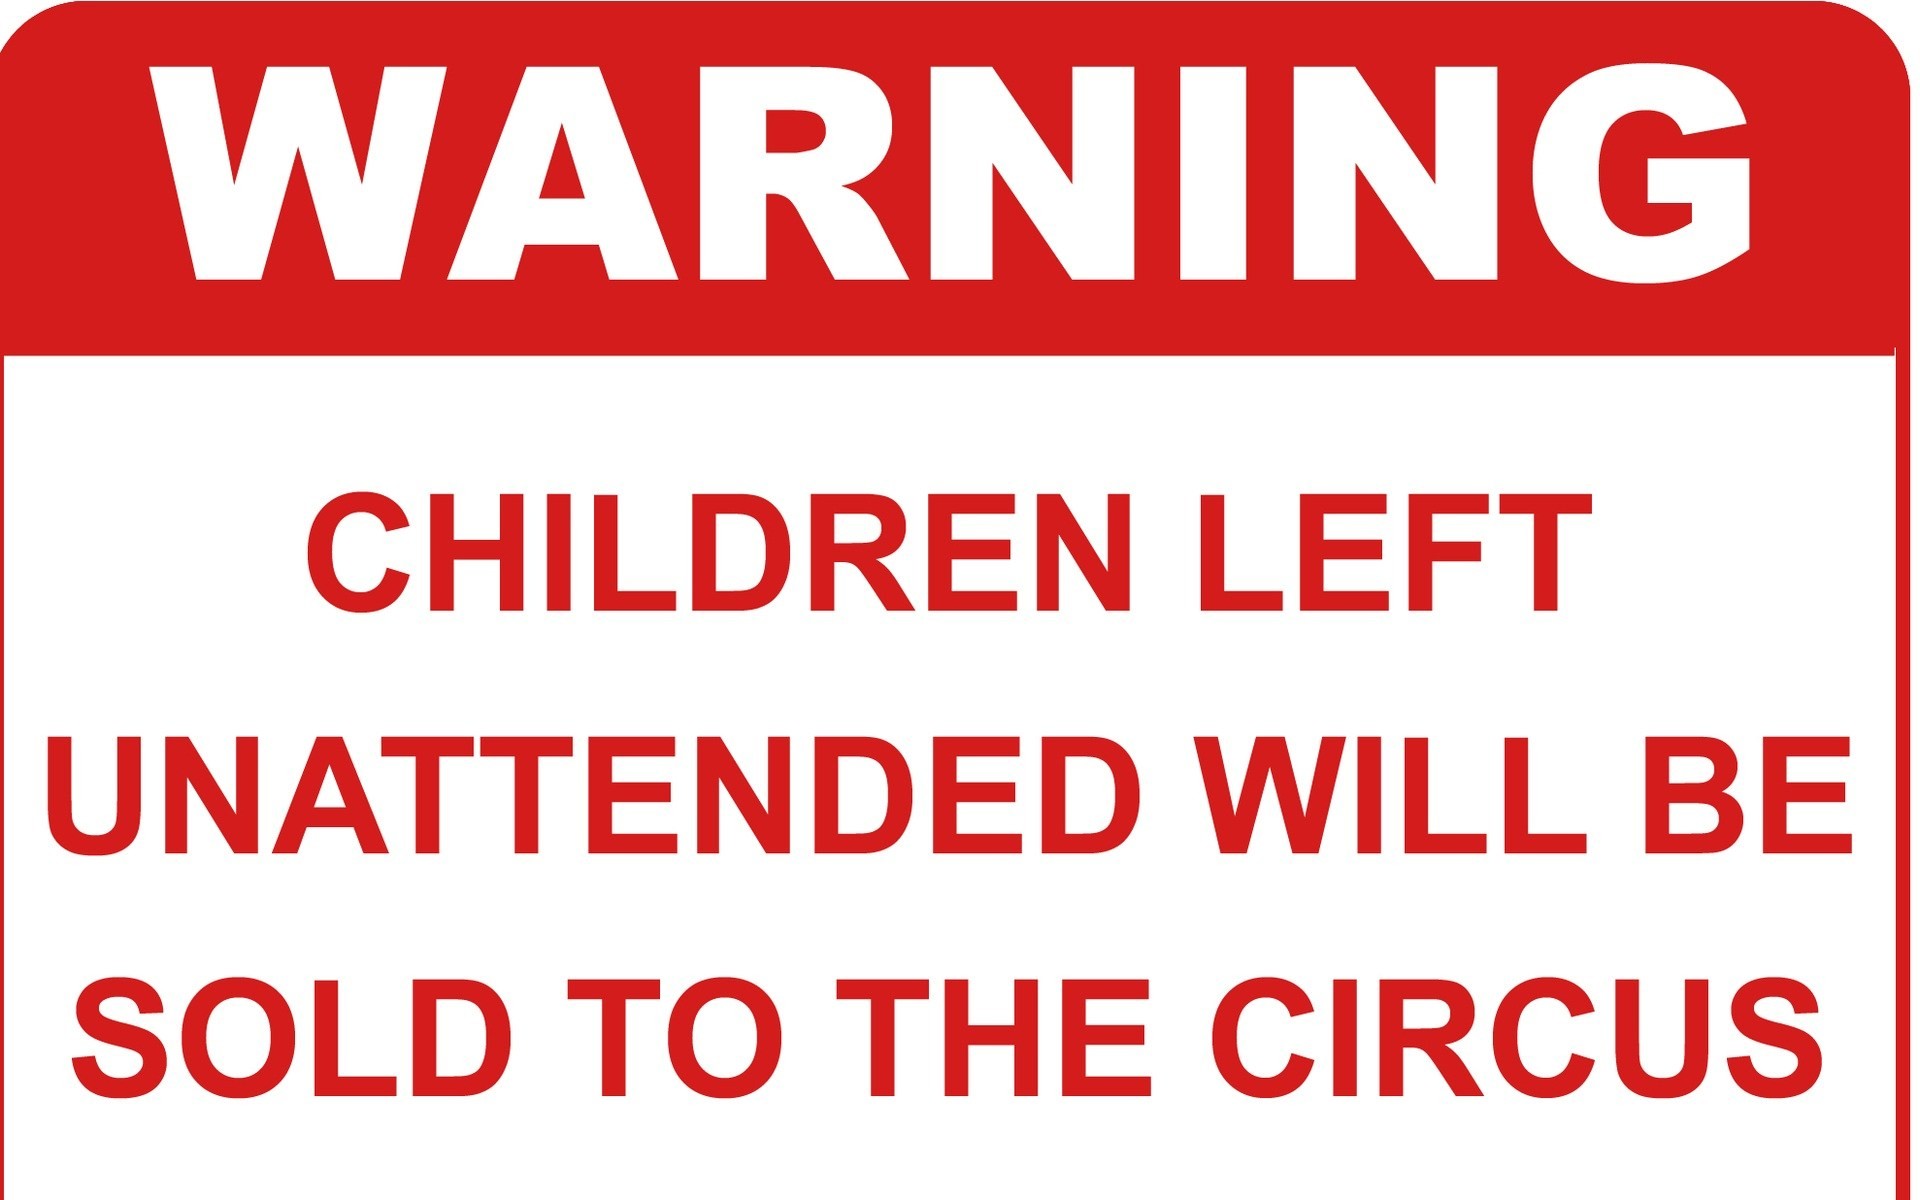 Nice Funny Caution Signs Wallpaper Of Awesome Full - Funny Caution - HD Wallpaper 